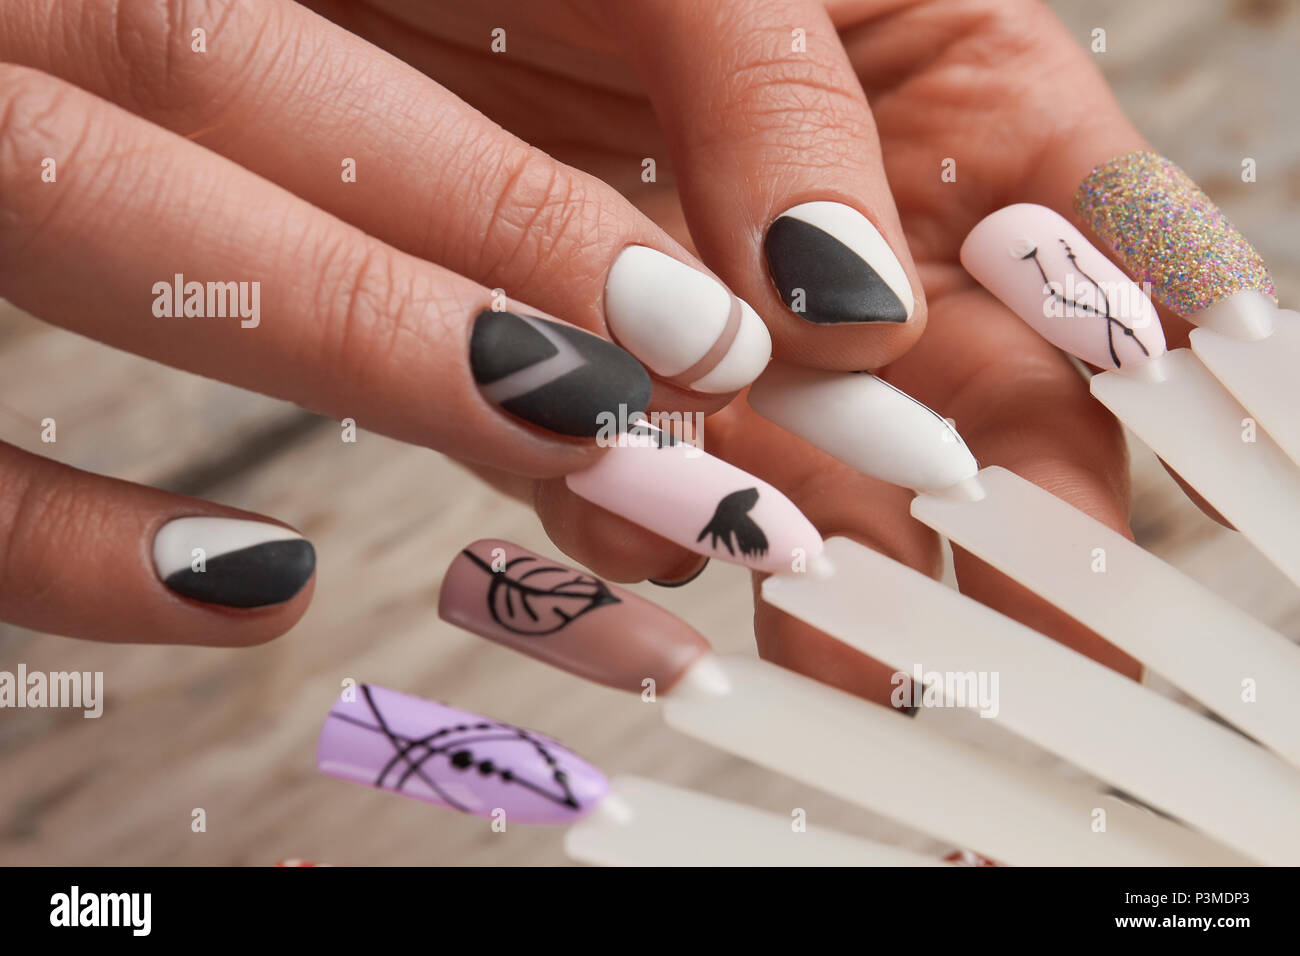 Nail art samples in female hands. Stock Photo